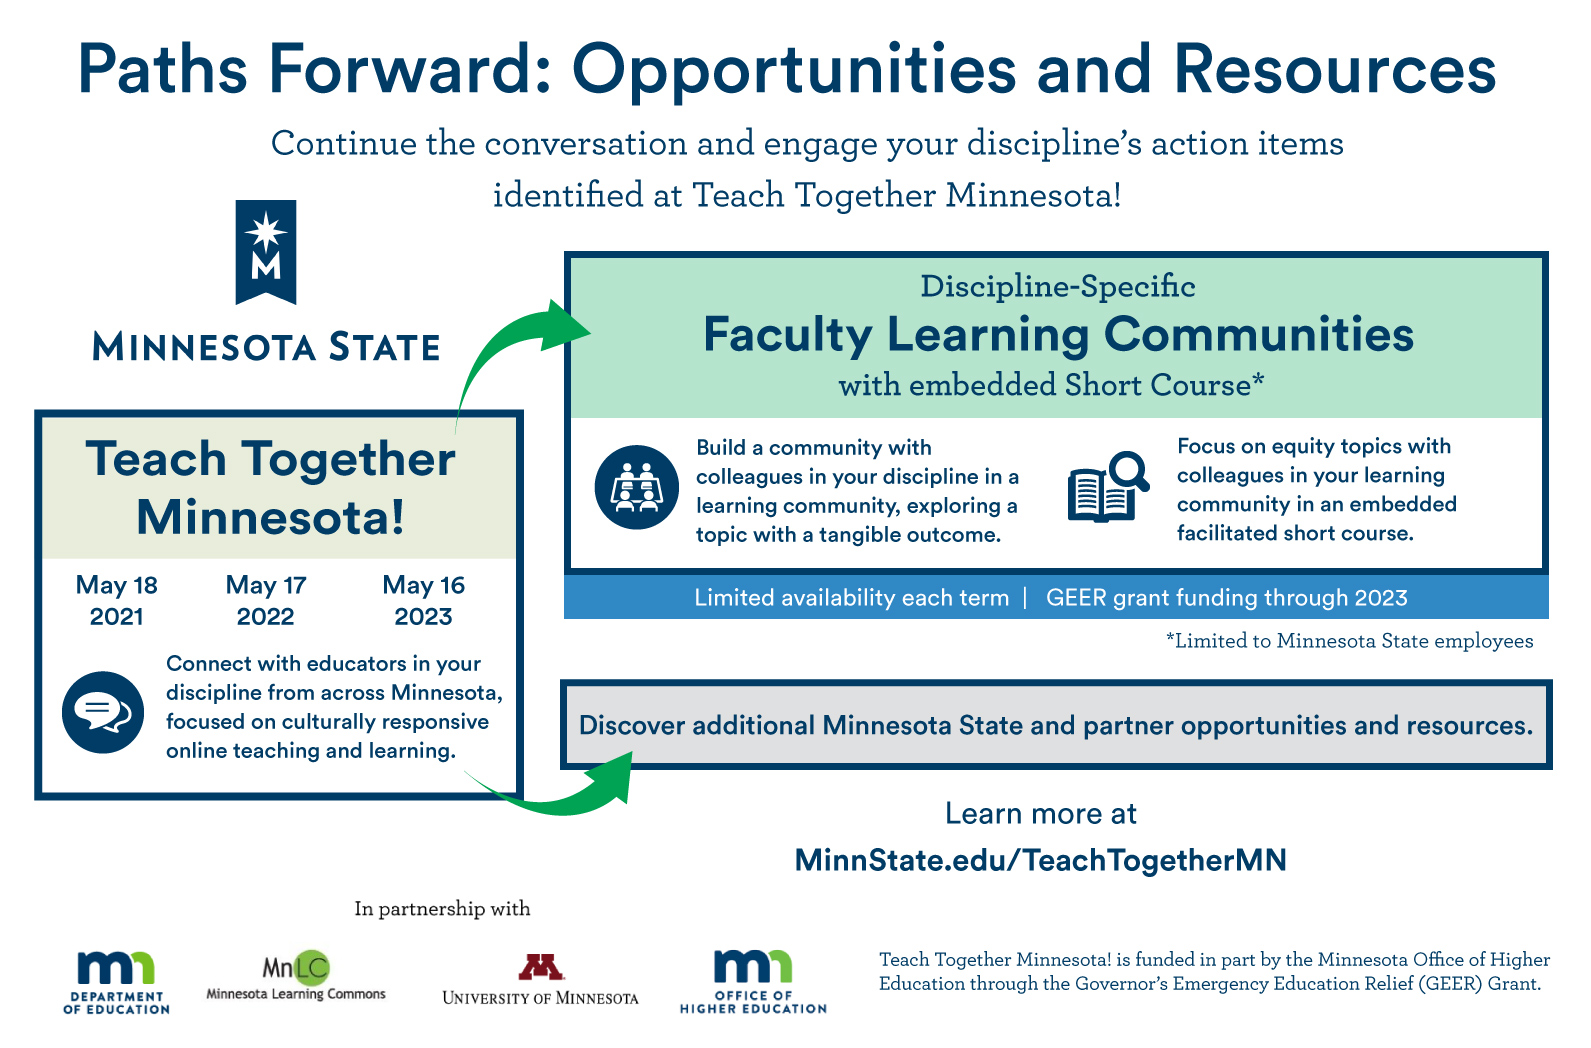 teach together minnesota dates: May 18 2021, May 17 2022, May 16 2023 